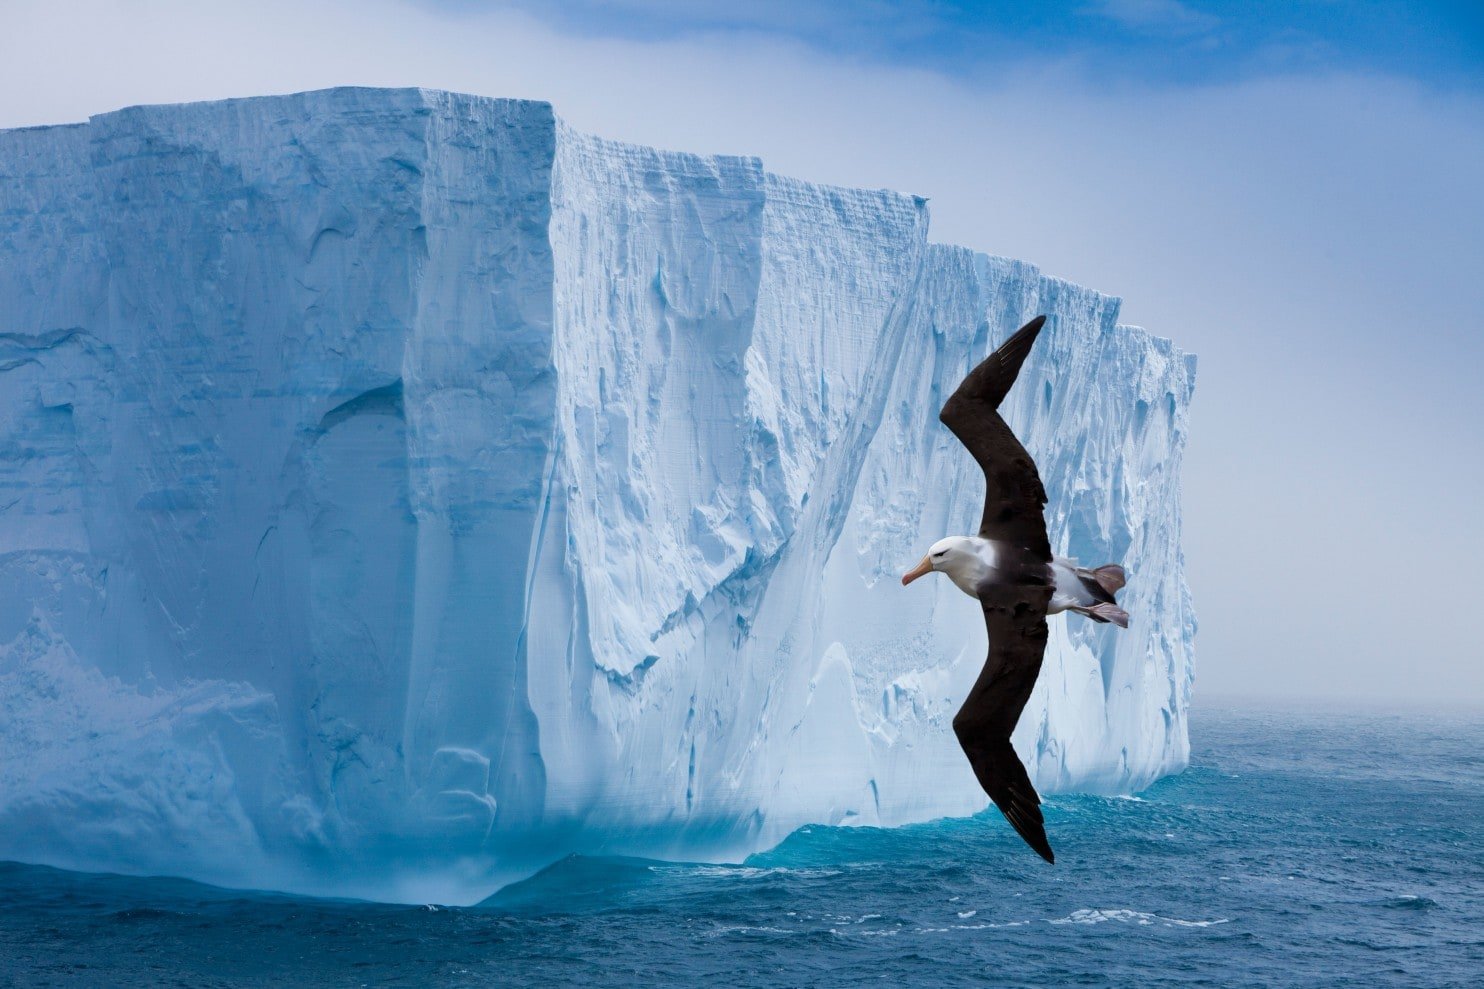 A black-browed albatross zips along the cliff-like edge of an iceberg. Whether at 4 a.m. or 9 p.m., there is always something to ogle in Antarctica. (Jim Zuckerman/Alamy Stock Photo)